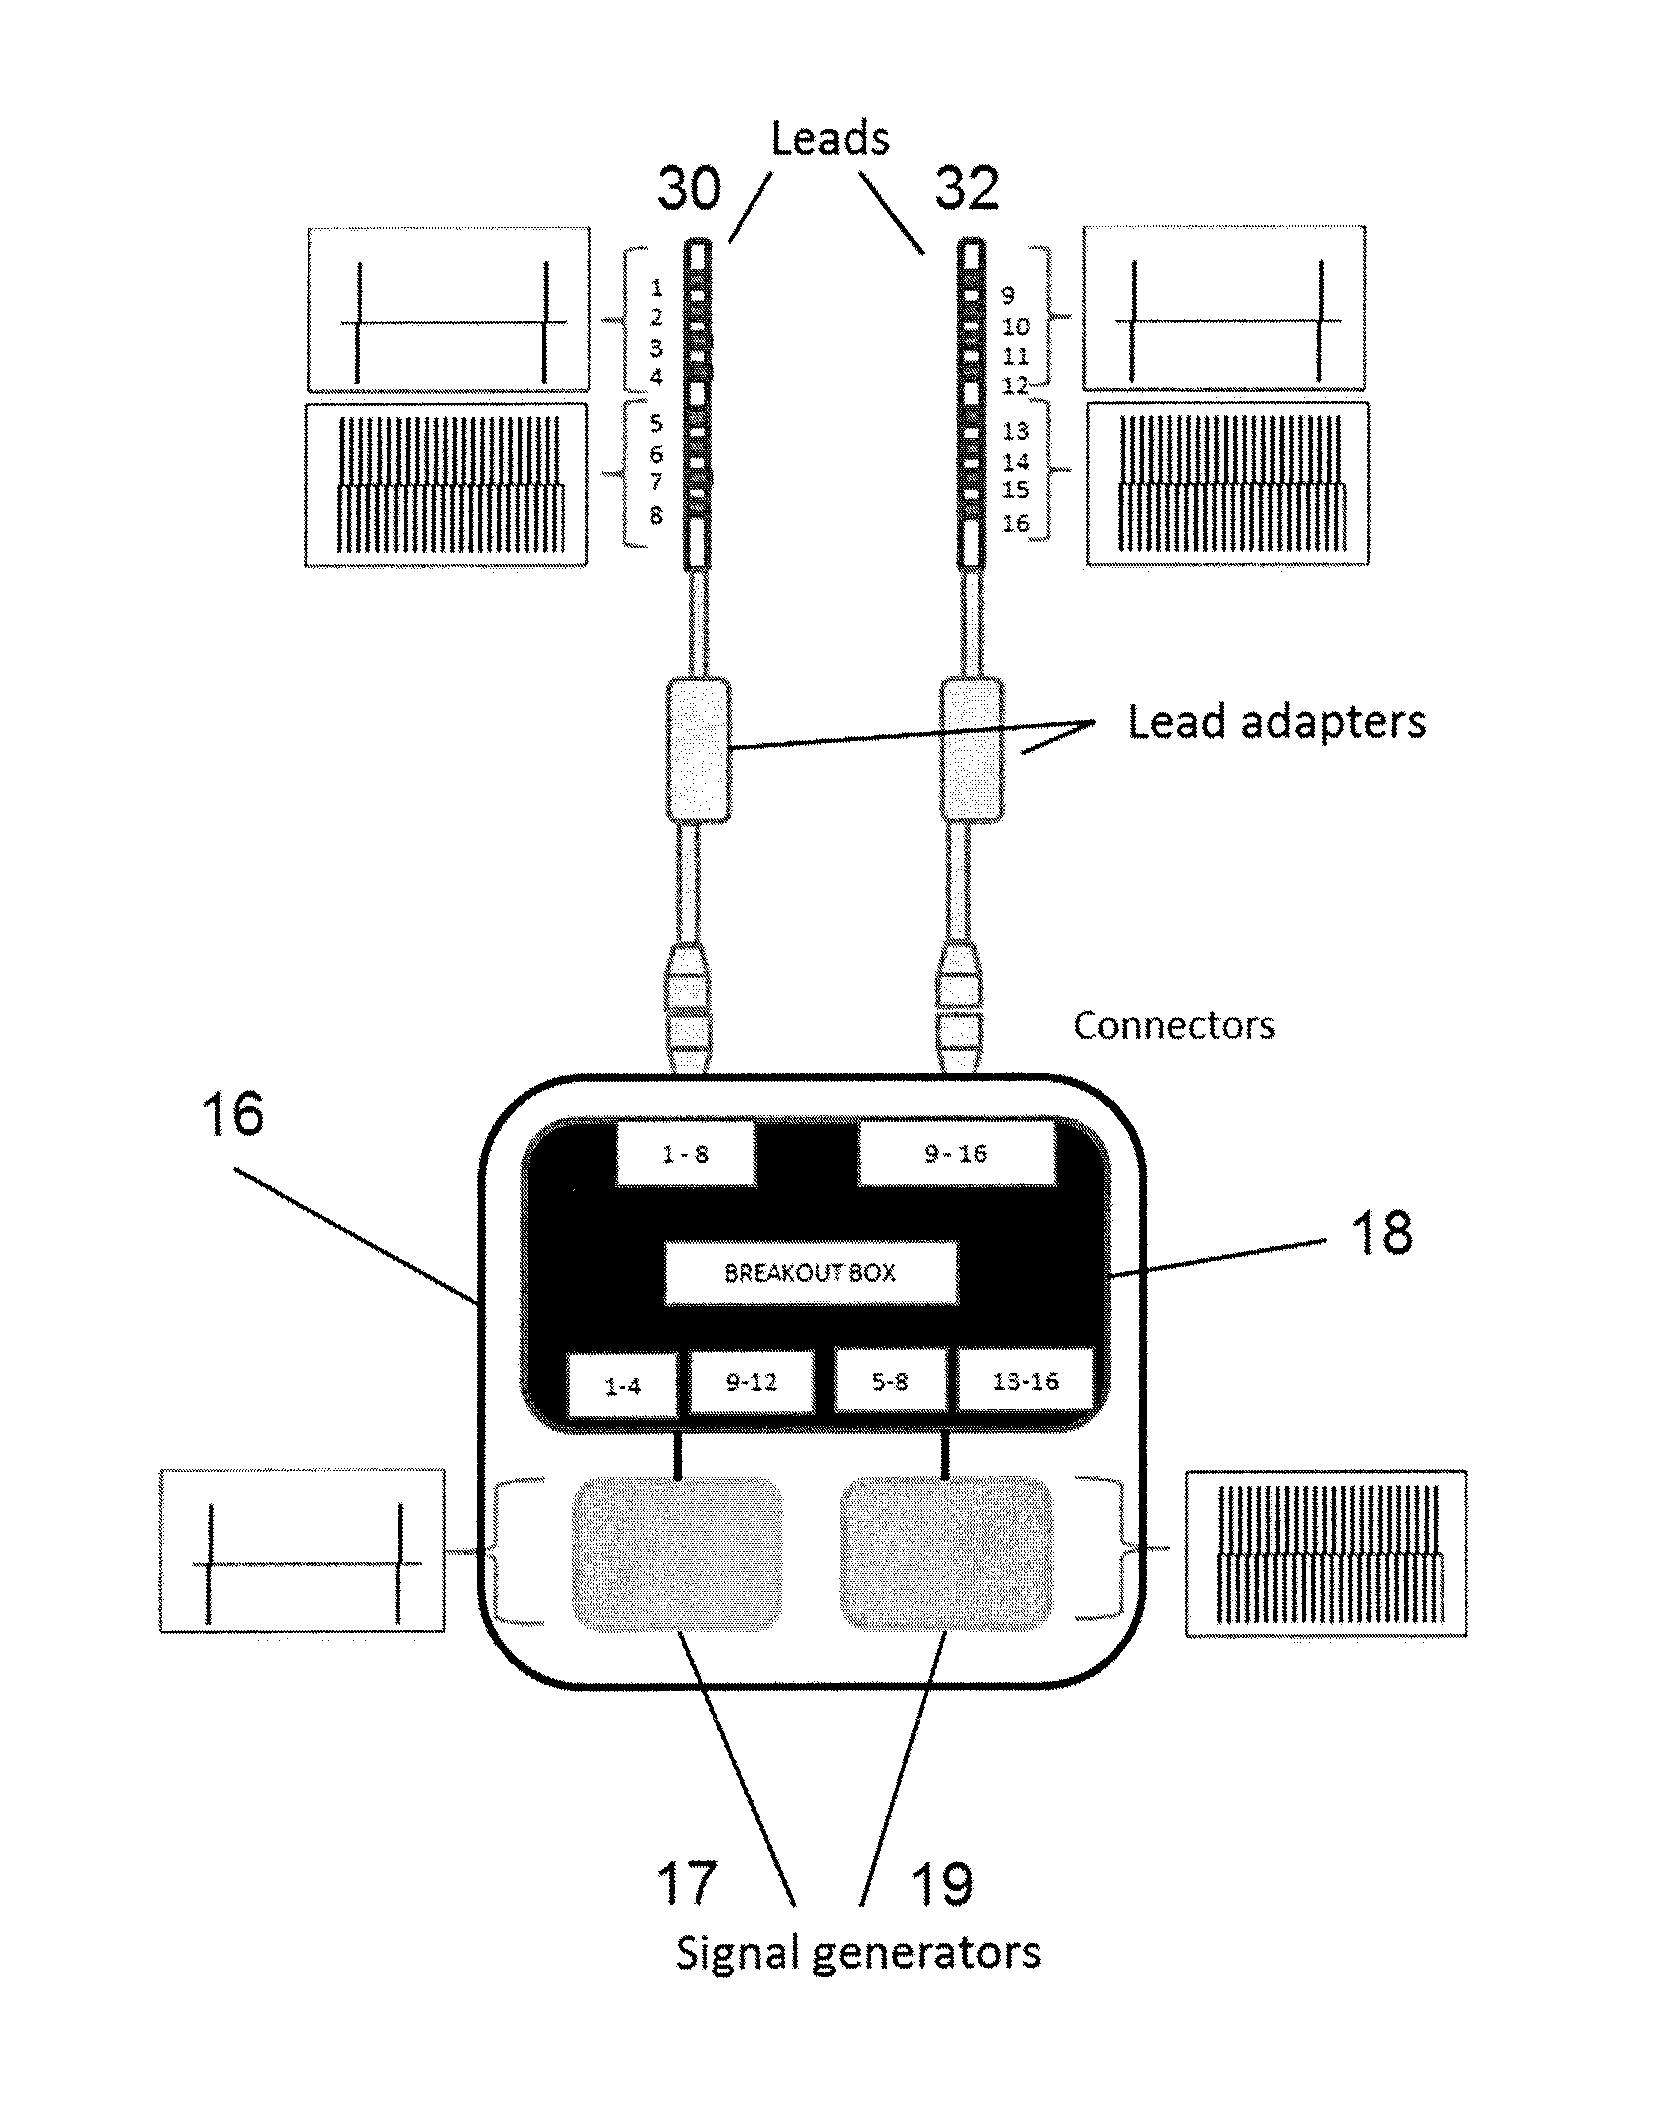 Method and apparatus for multimodal electrical modulation of pain